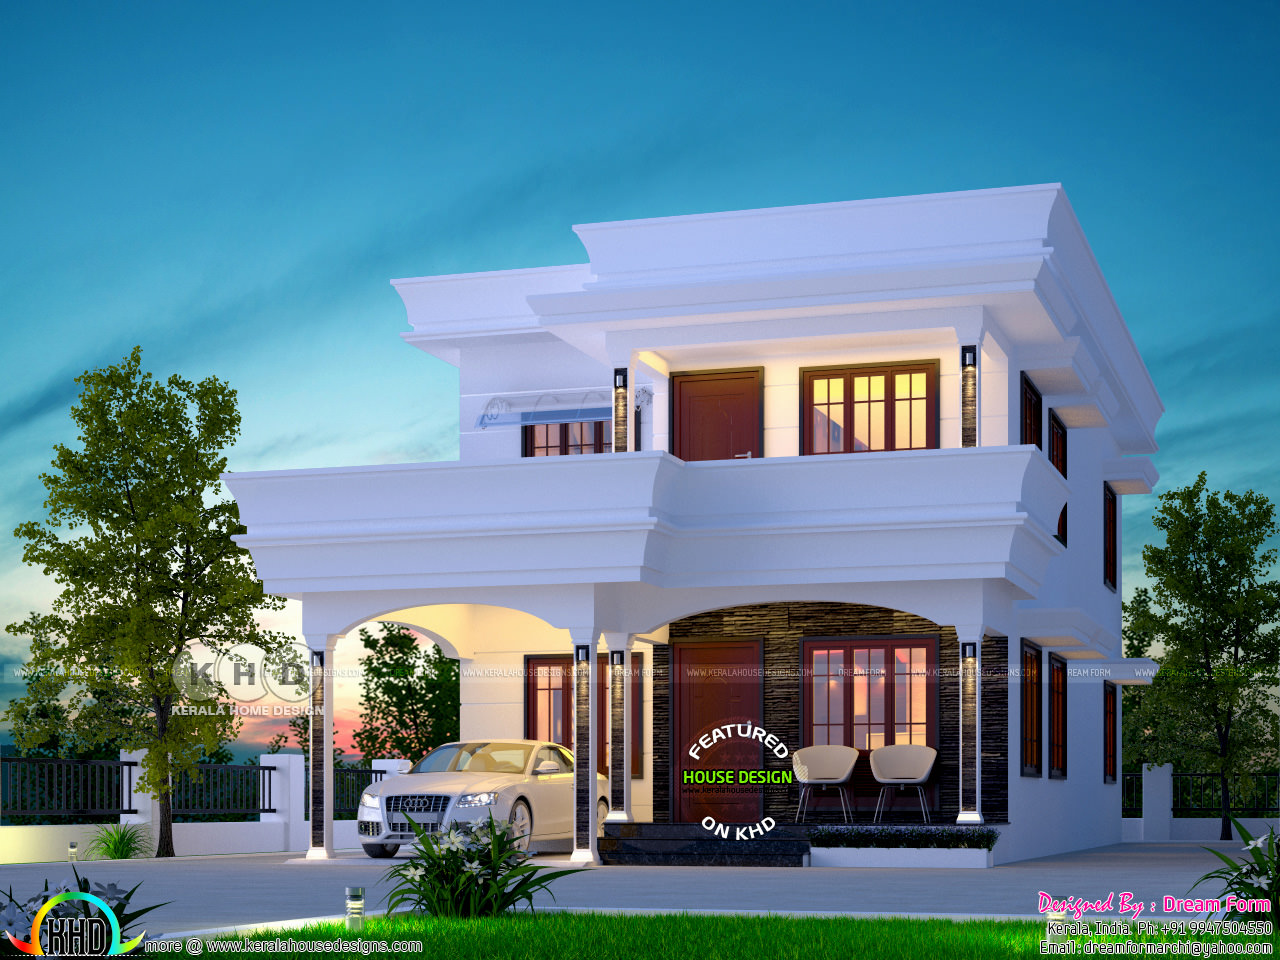 Grand 4  bedroom  house  in 5  cents  of land Kerala home  